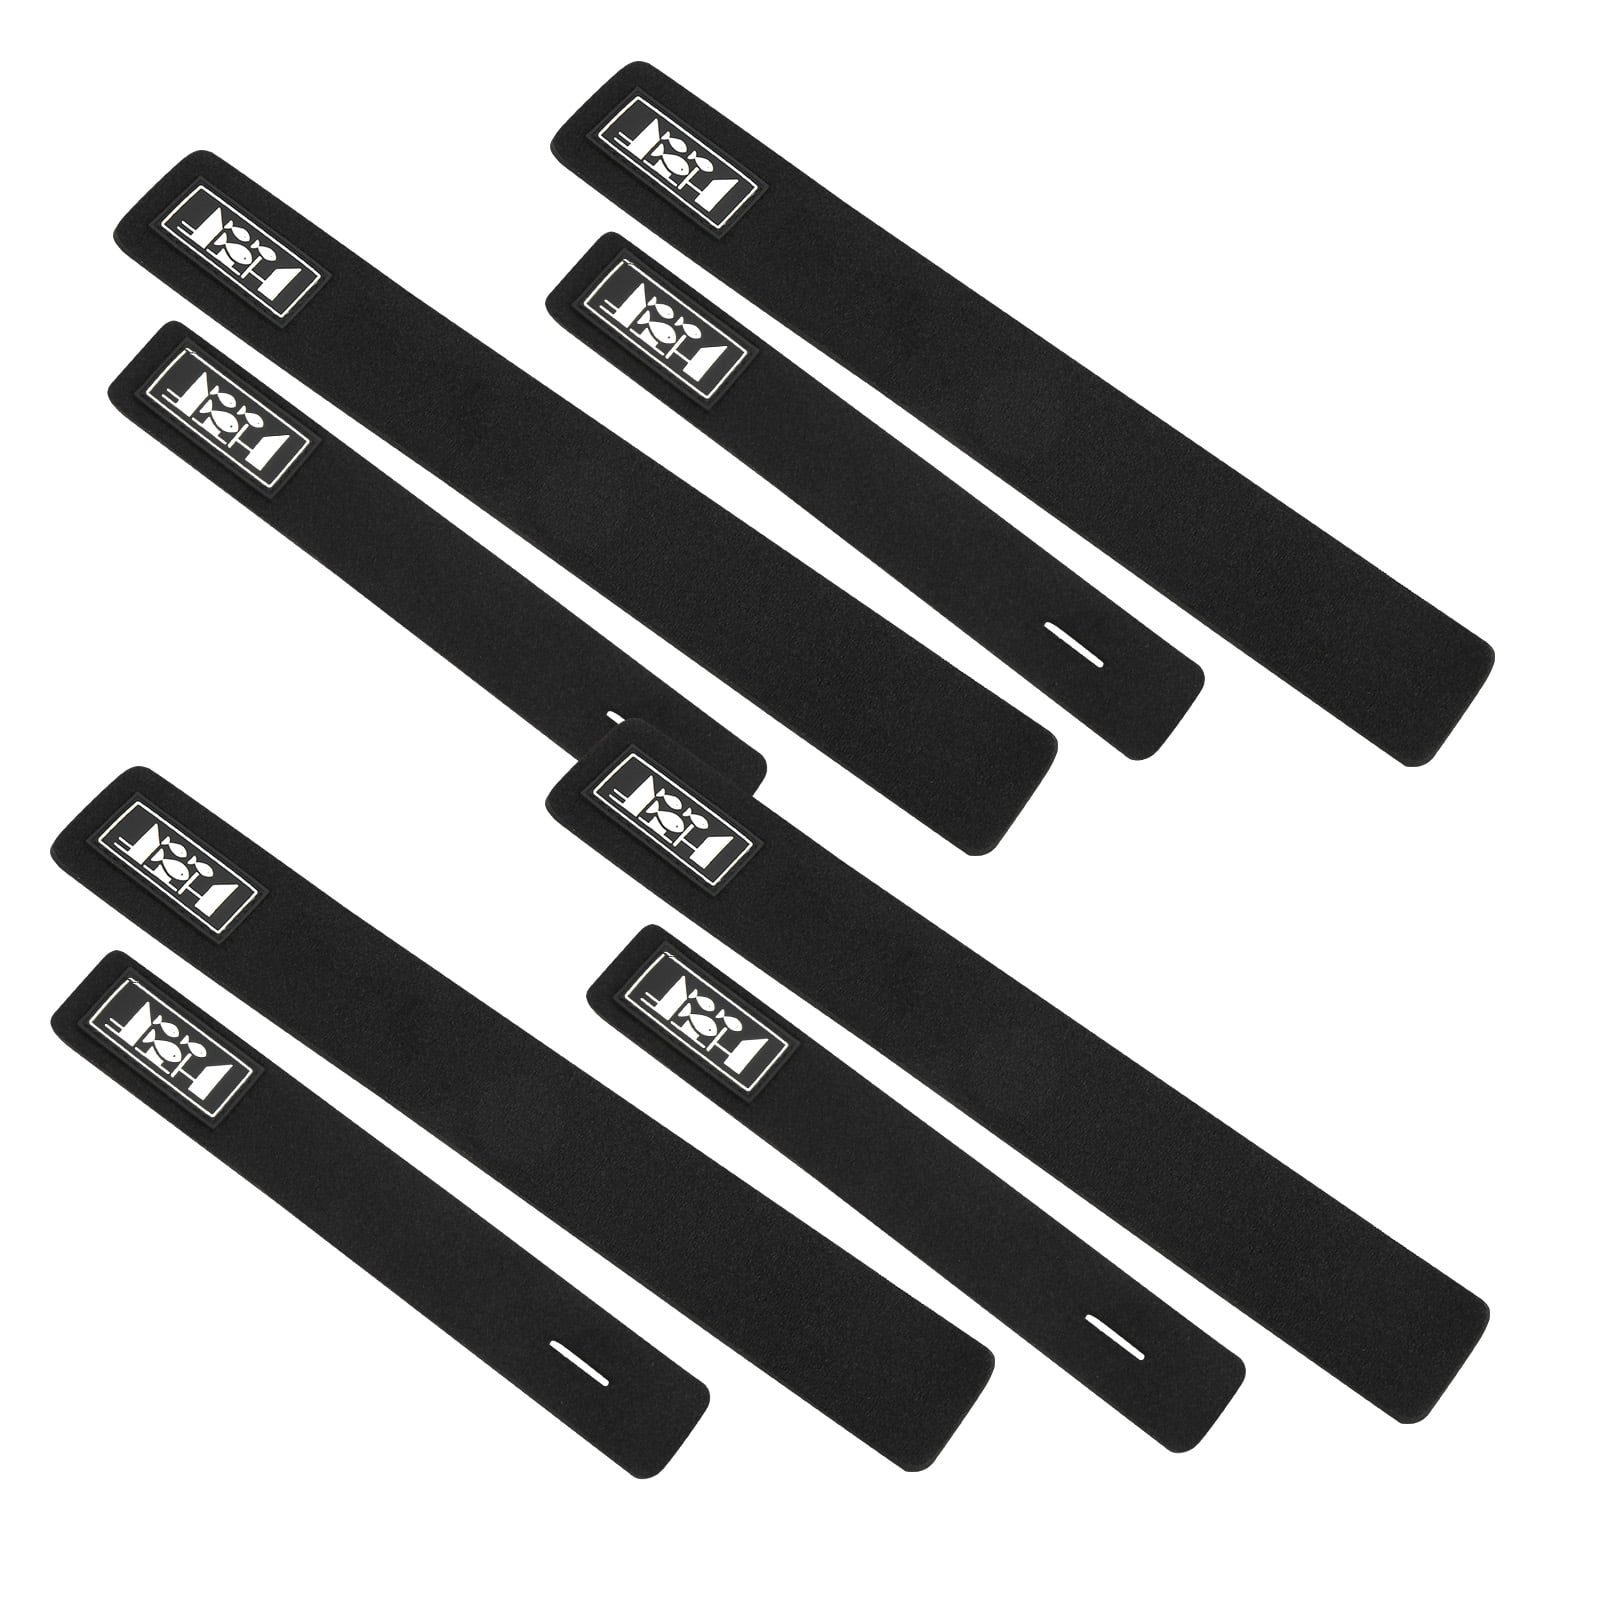 Fayisomia 4Pcs Fishing Tool Rod Bandage Belt Fish Hook Elastic Wrapping Tape Pole Bracket Accessory for Fishing in The Ocean Boats Rivers Lakes Pond Streams